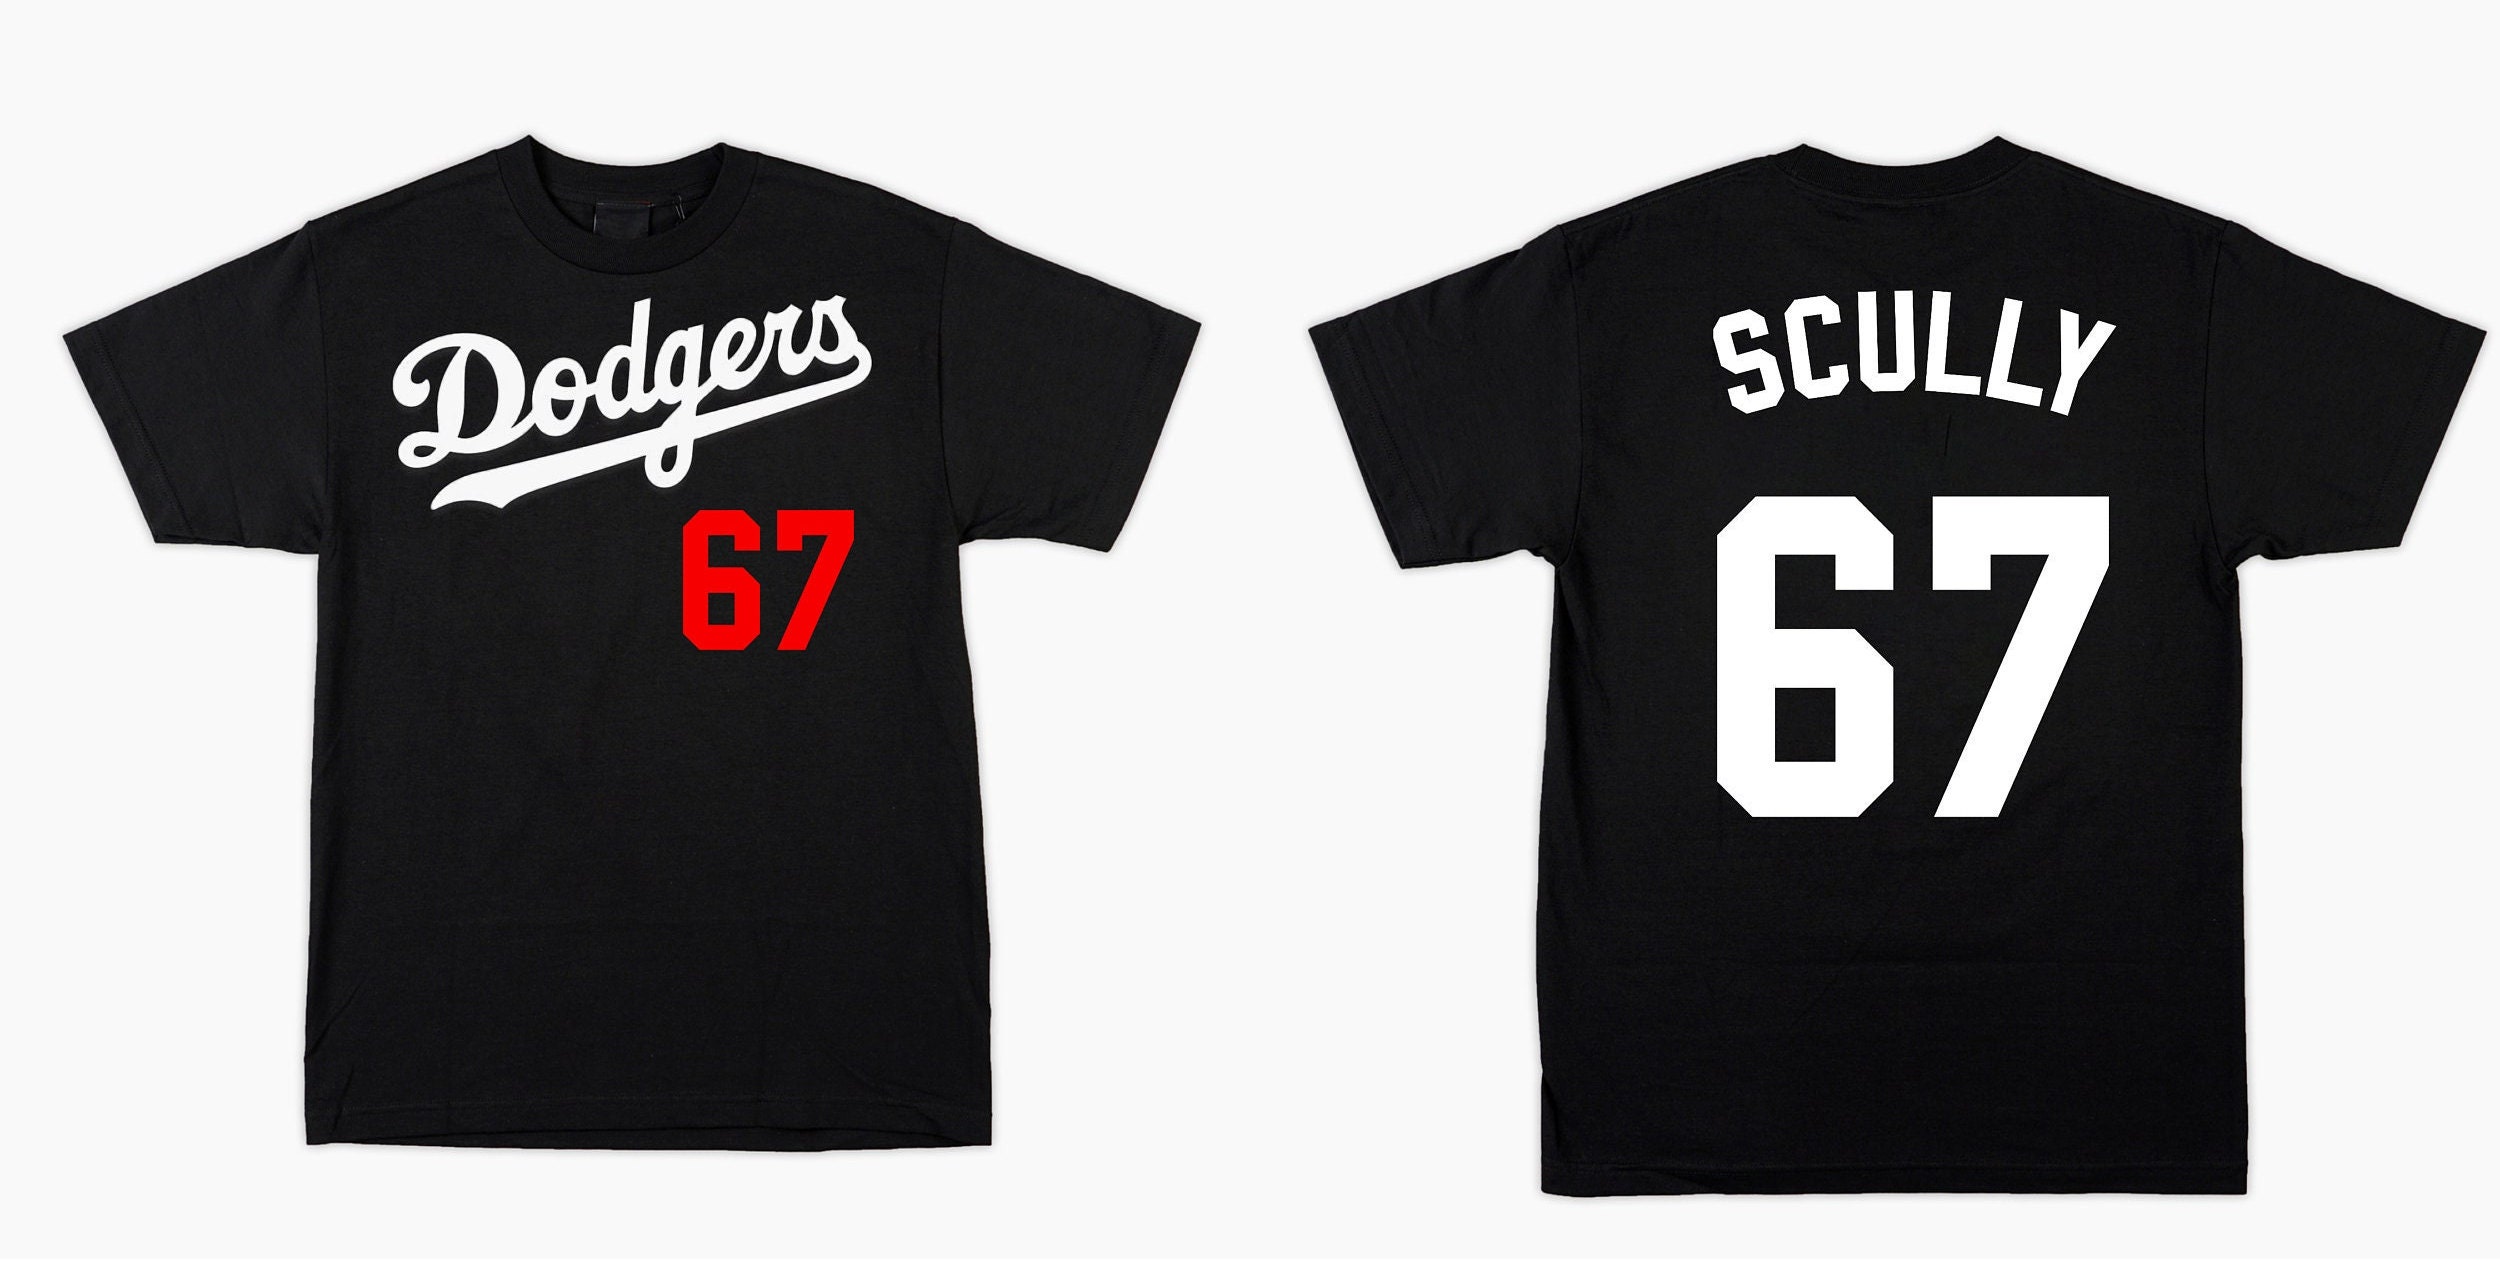 LittleCupOfSugar VIN Scully Dodgers Jersey Style Tshirt - Made to Order - All Sizes Available